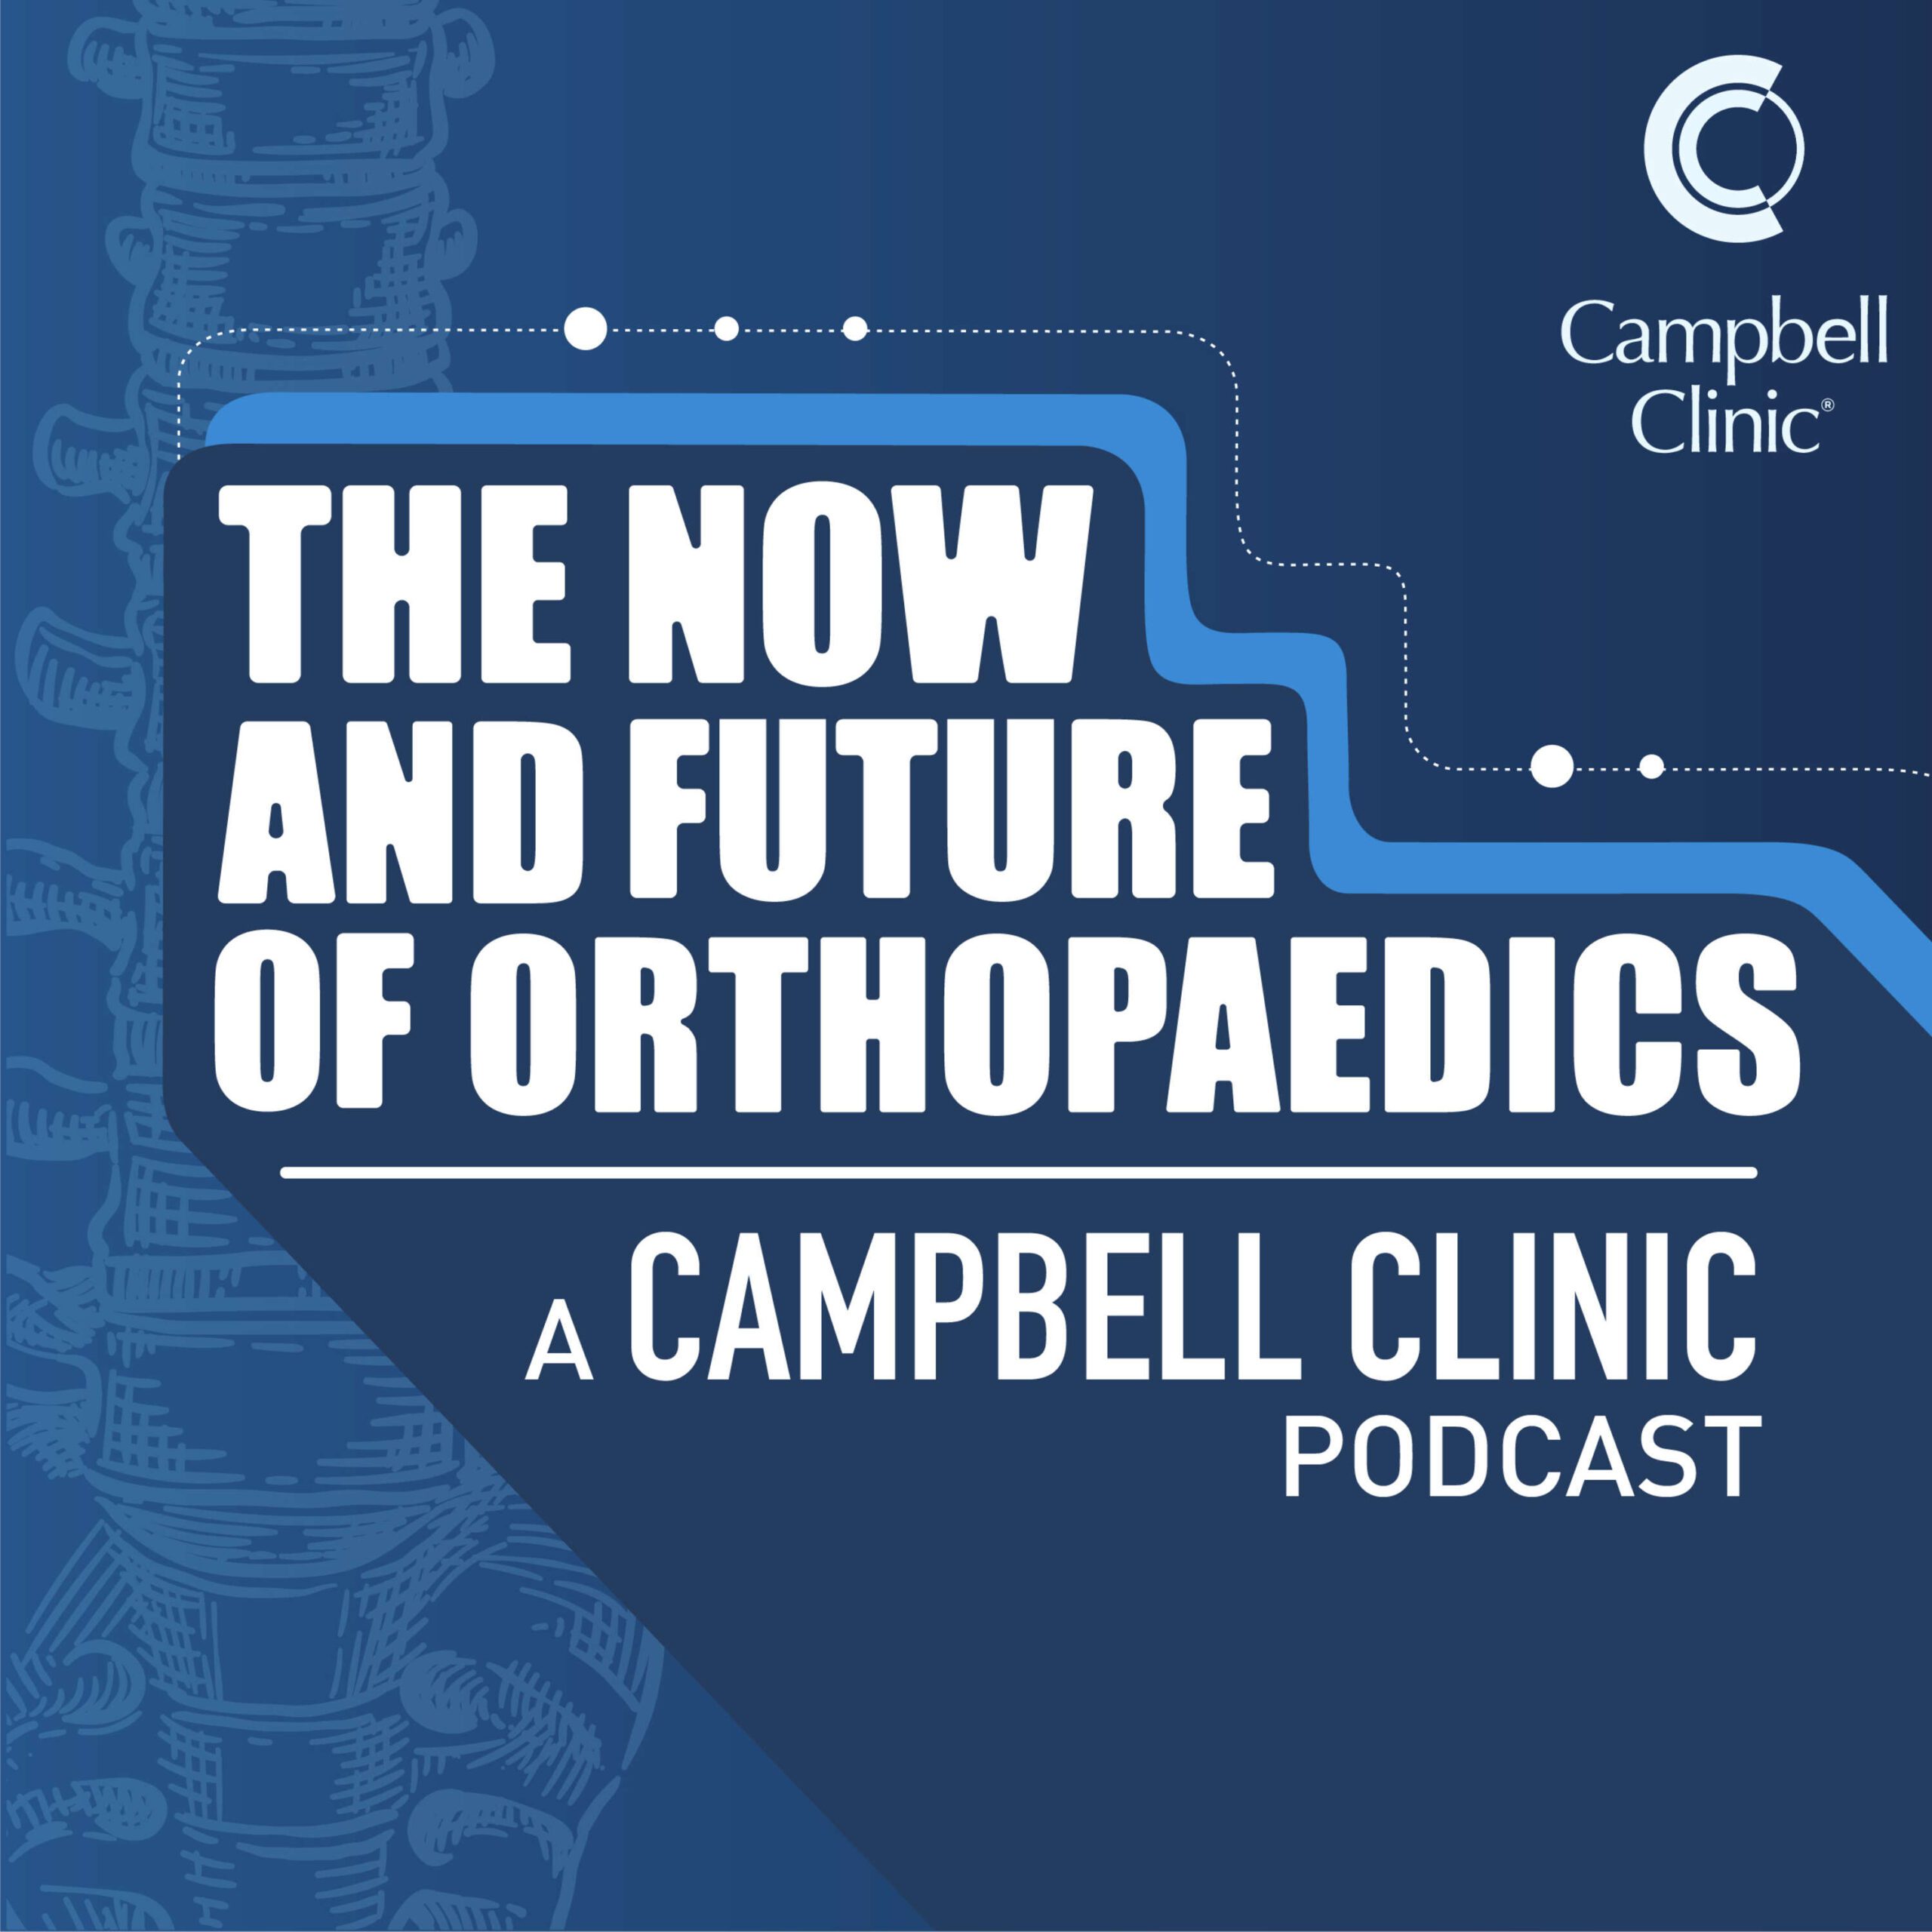 The Now and Future of Orthopaedics